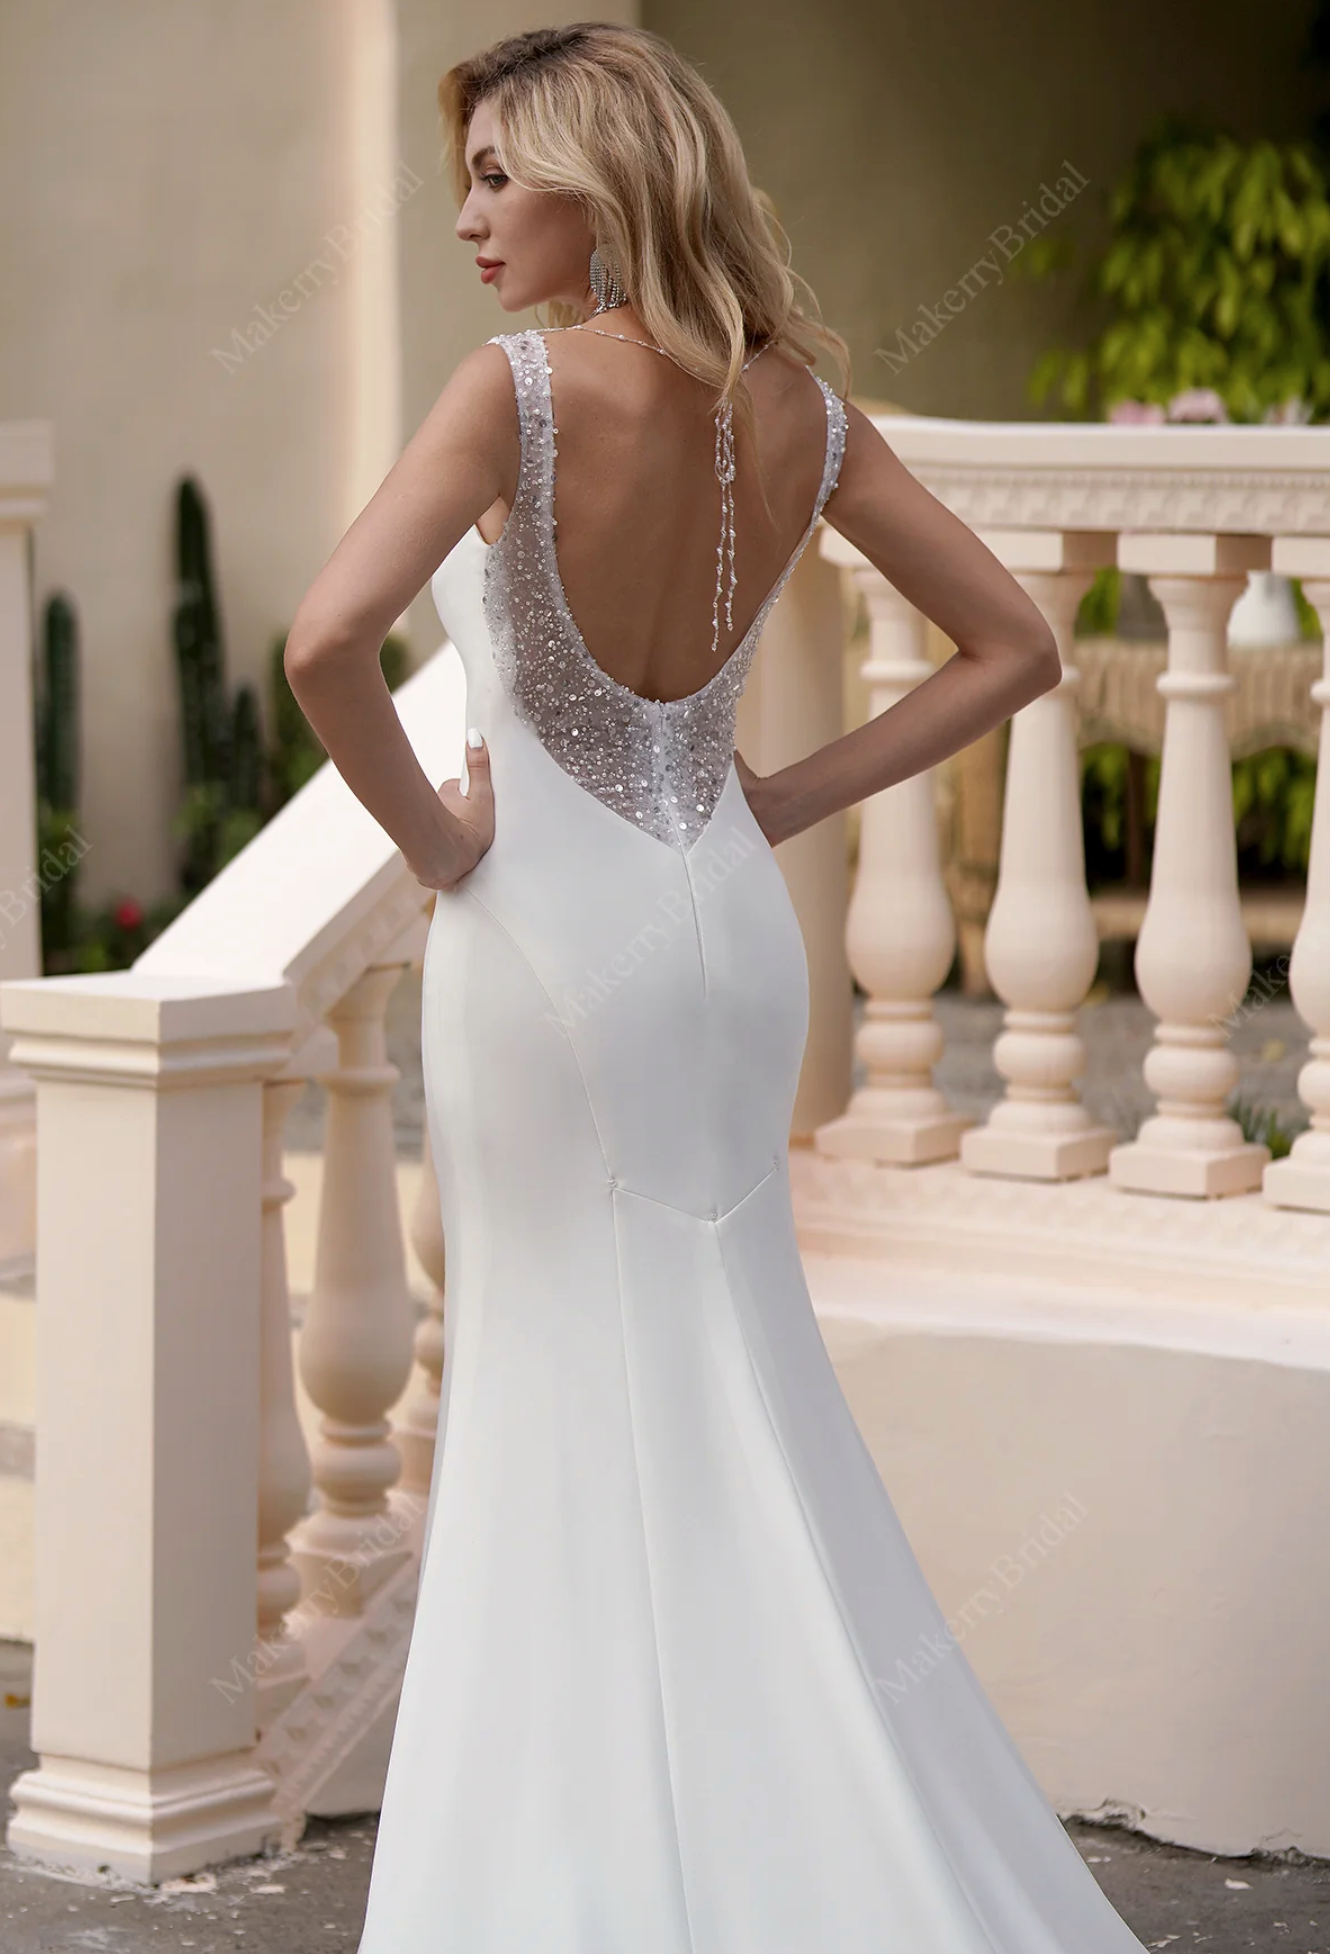 Simple A Line Soft Satin Sleeveless Tea Length Bridal Dress – TulleLux  Bridal Crowns & Accessories